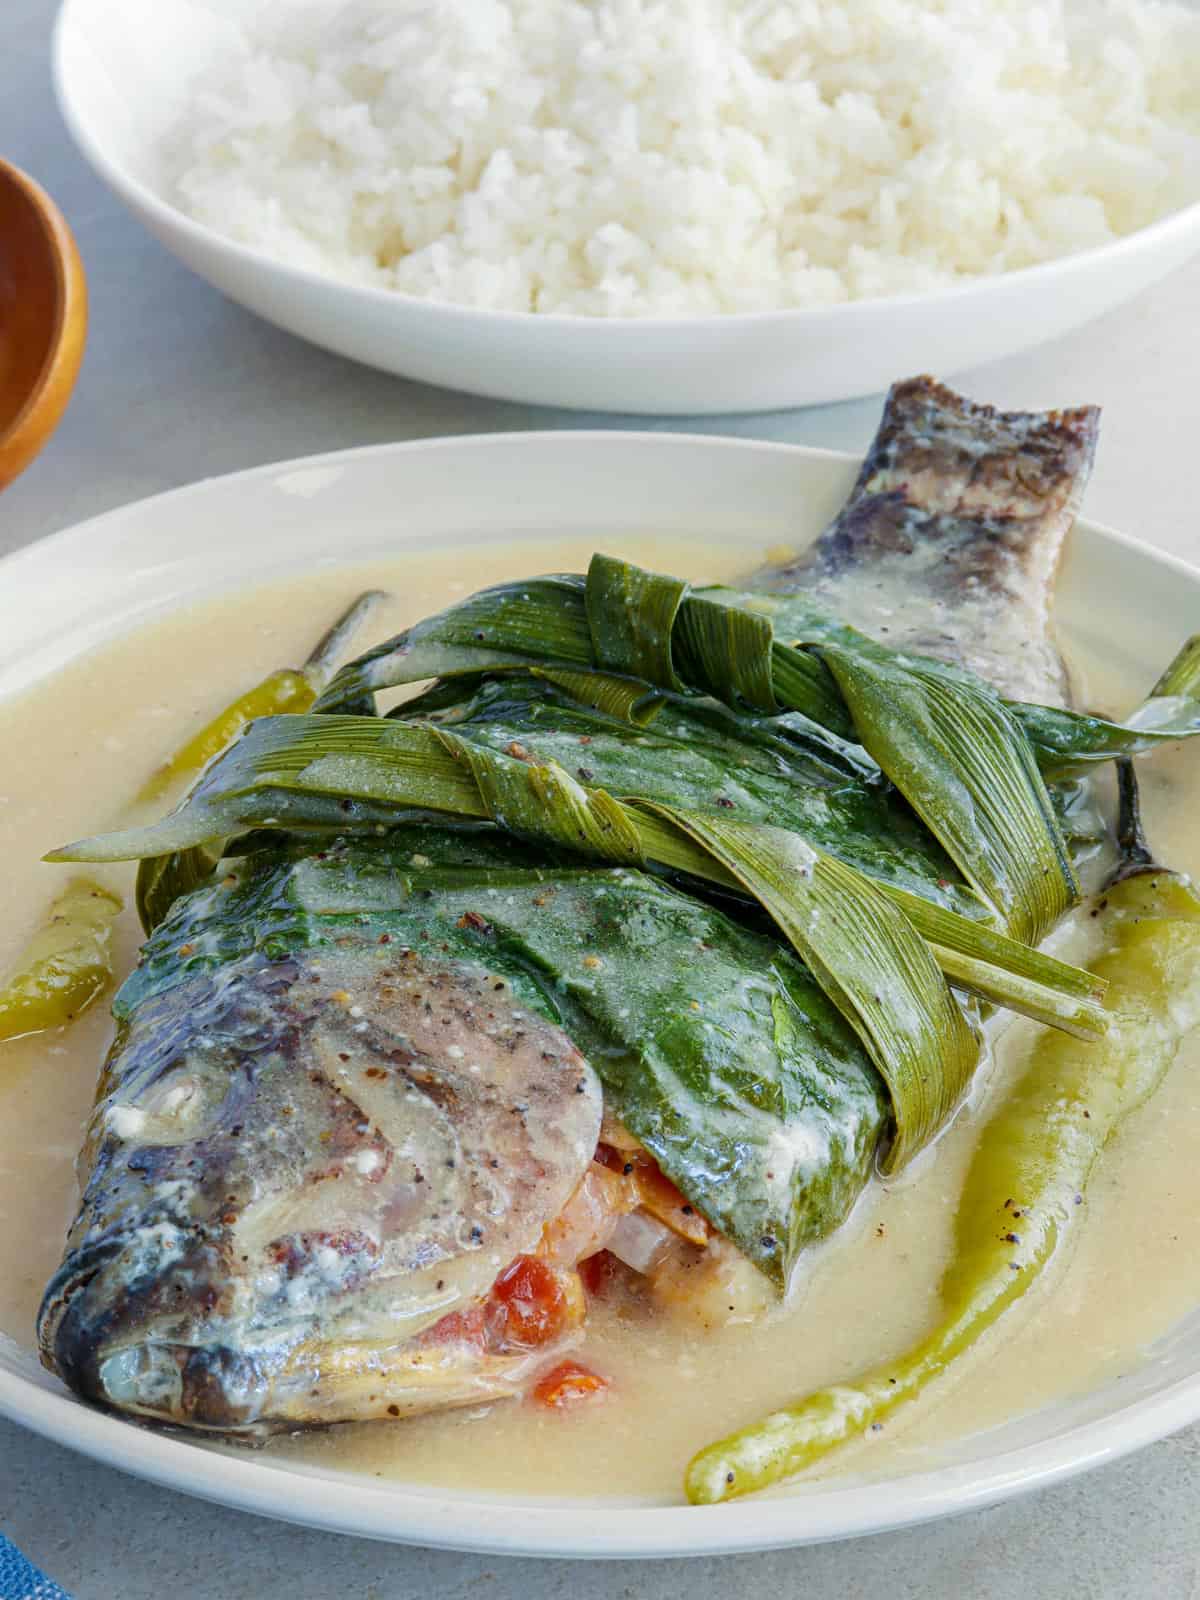 Sinanglay na Tilapia on white serving plate with a plate of steamed rice in the background.